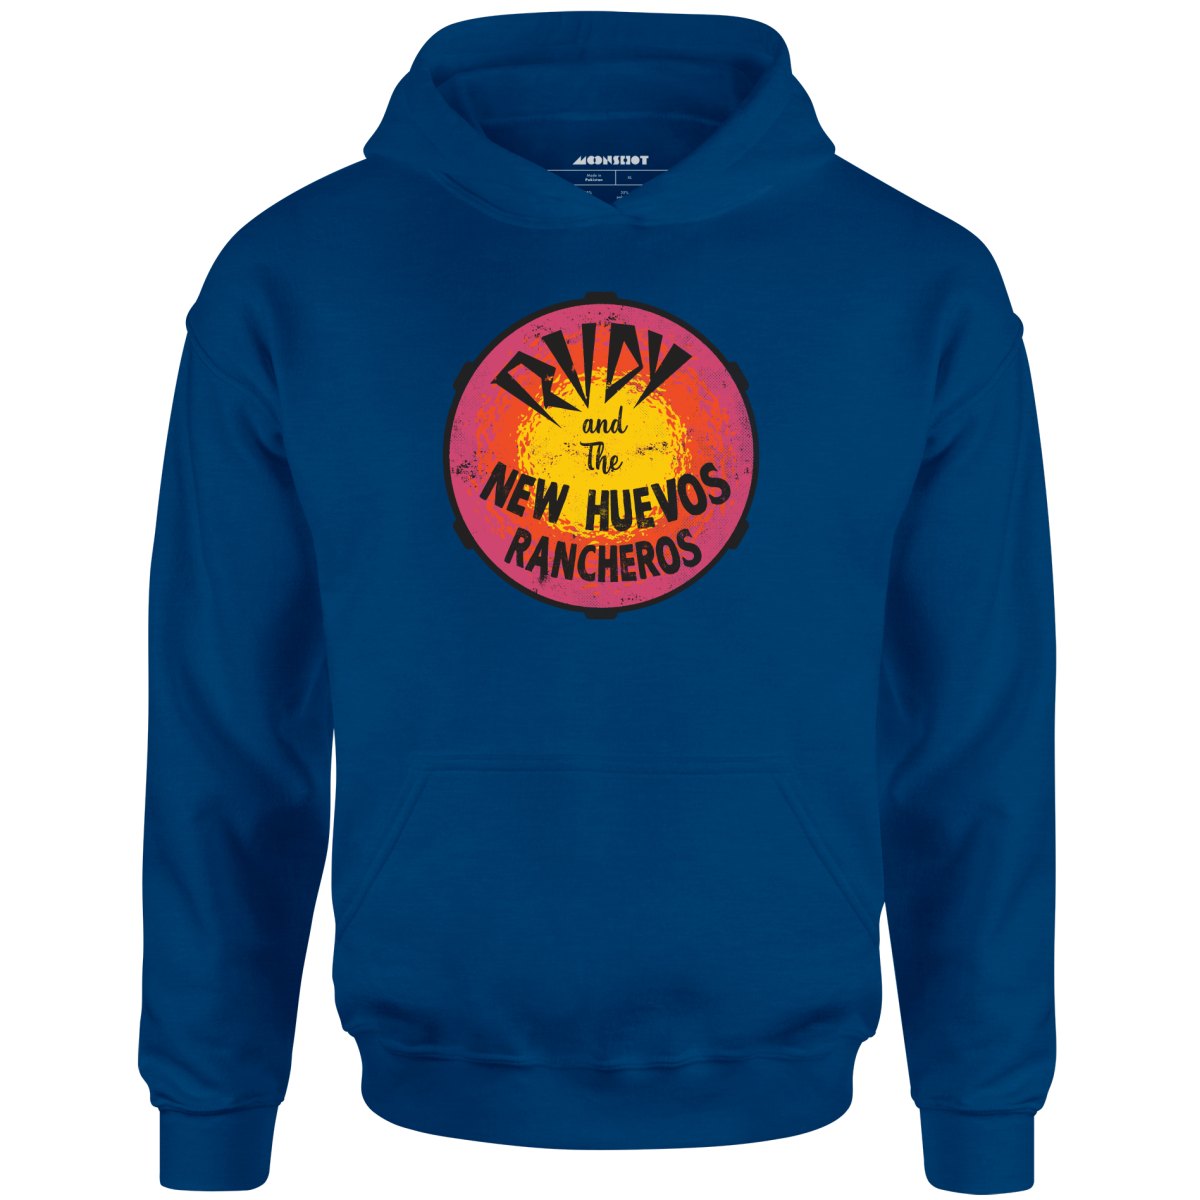 Rudy and the New Huevos Rancheros - Unisex Hoodie